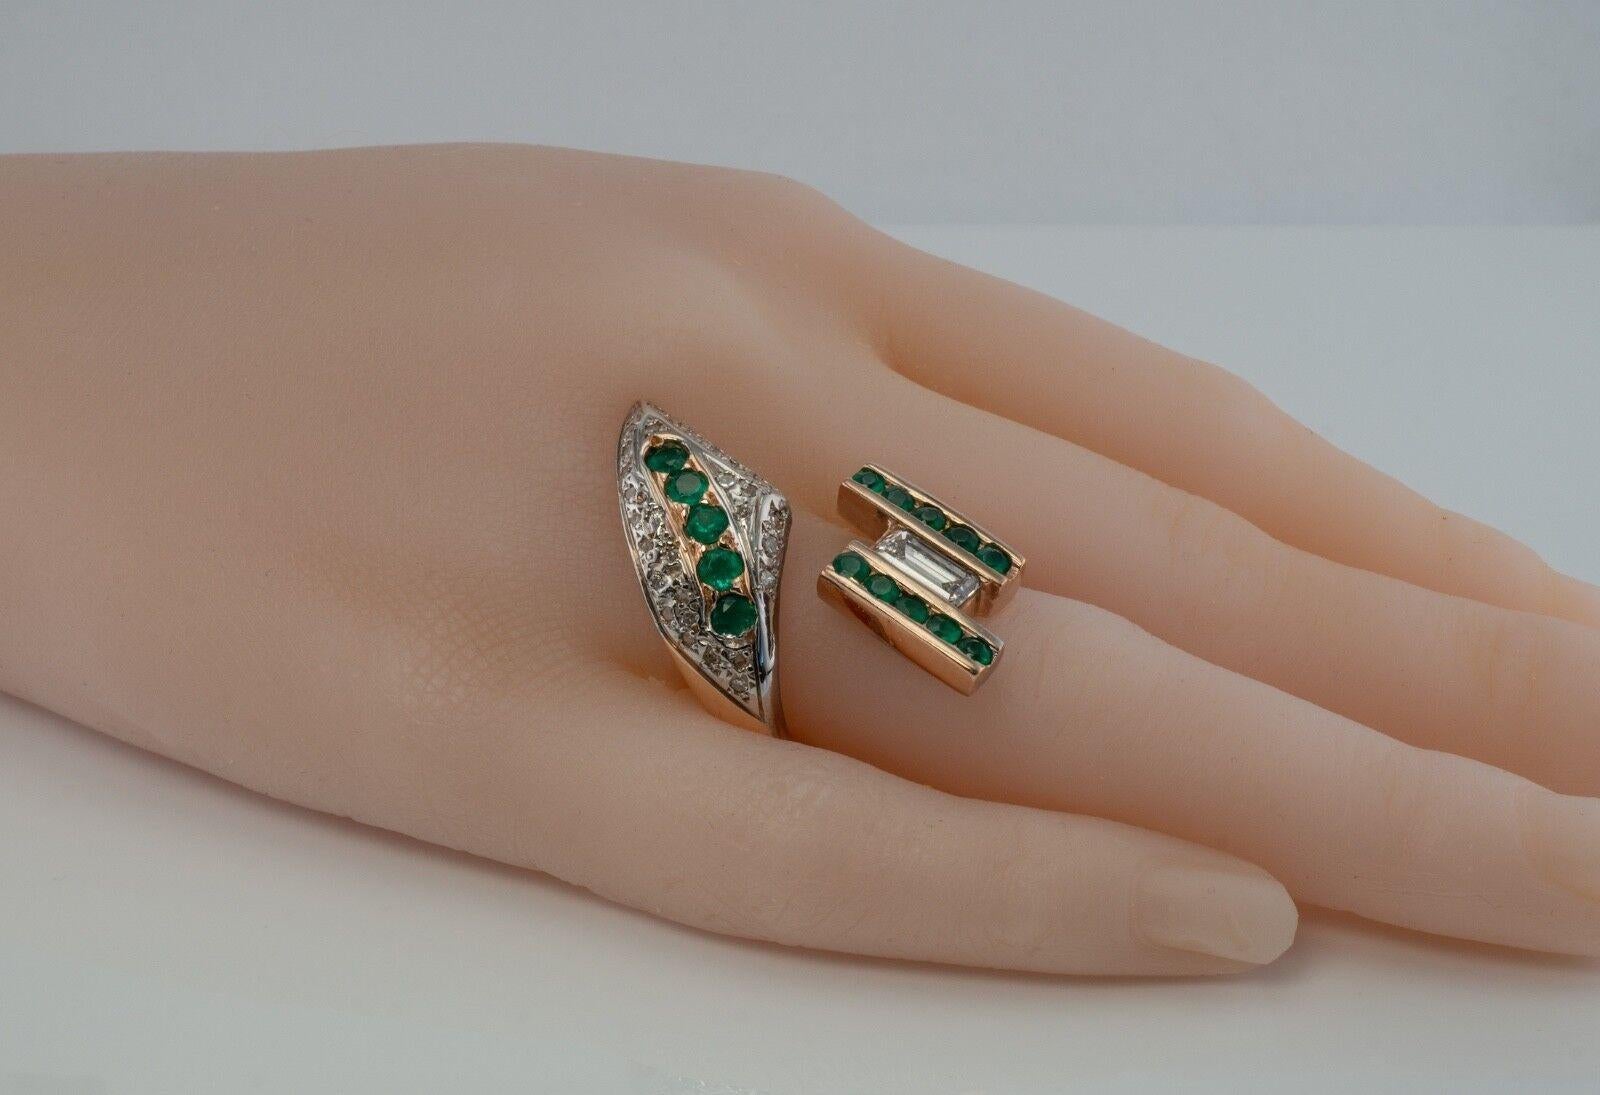 This one of a kind vintage ring is crafted in solid 14K Rose gold and set with genuine Earth-mined Emeralds and diamonds. The snake's head holds five 3mm each emeralds (.60 carat) and 27 diamonds (.20 carat). The top part holds amazing diamond